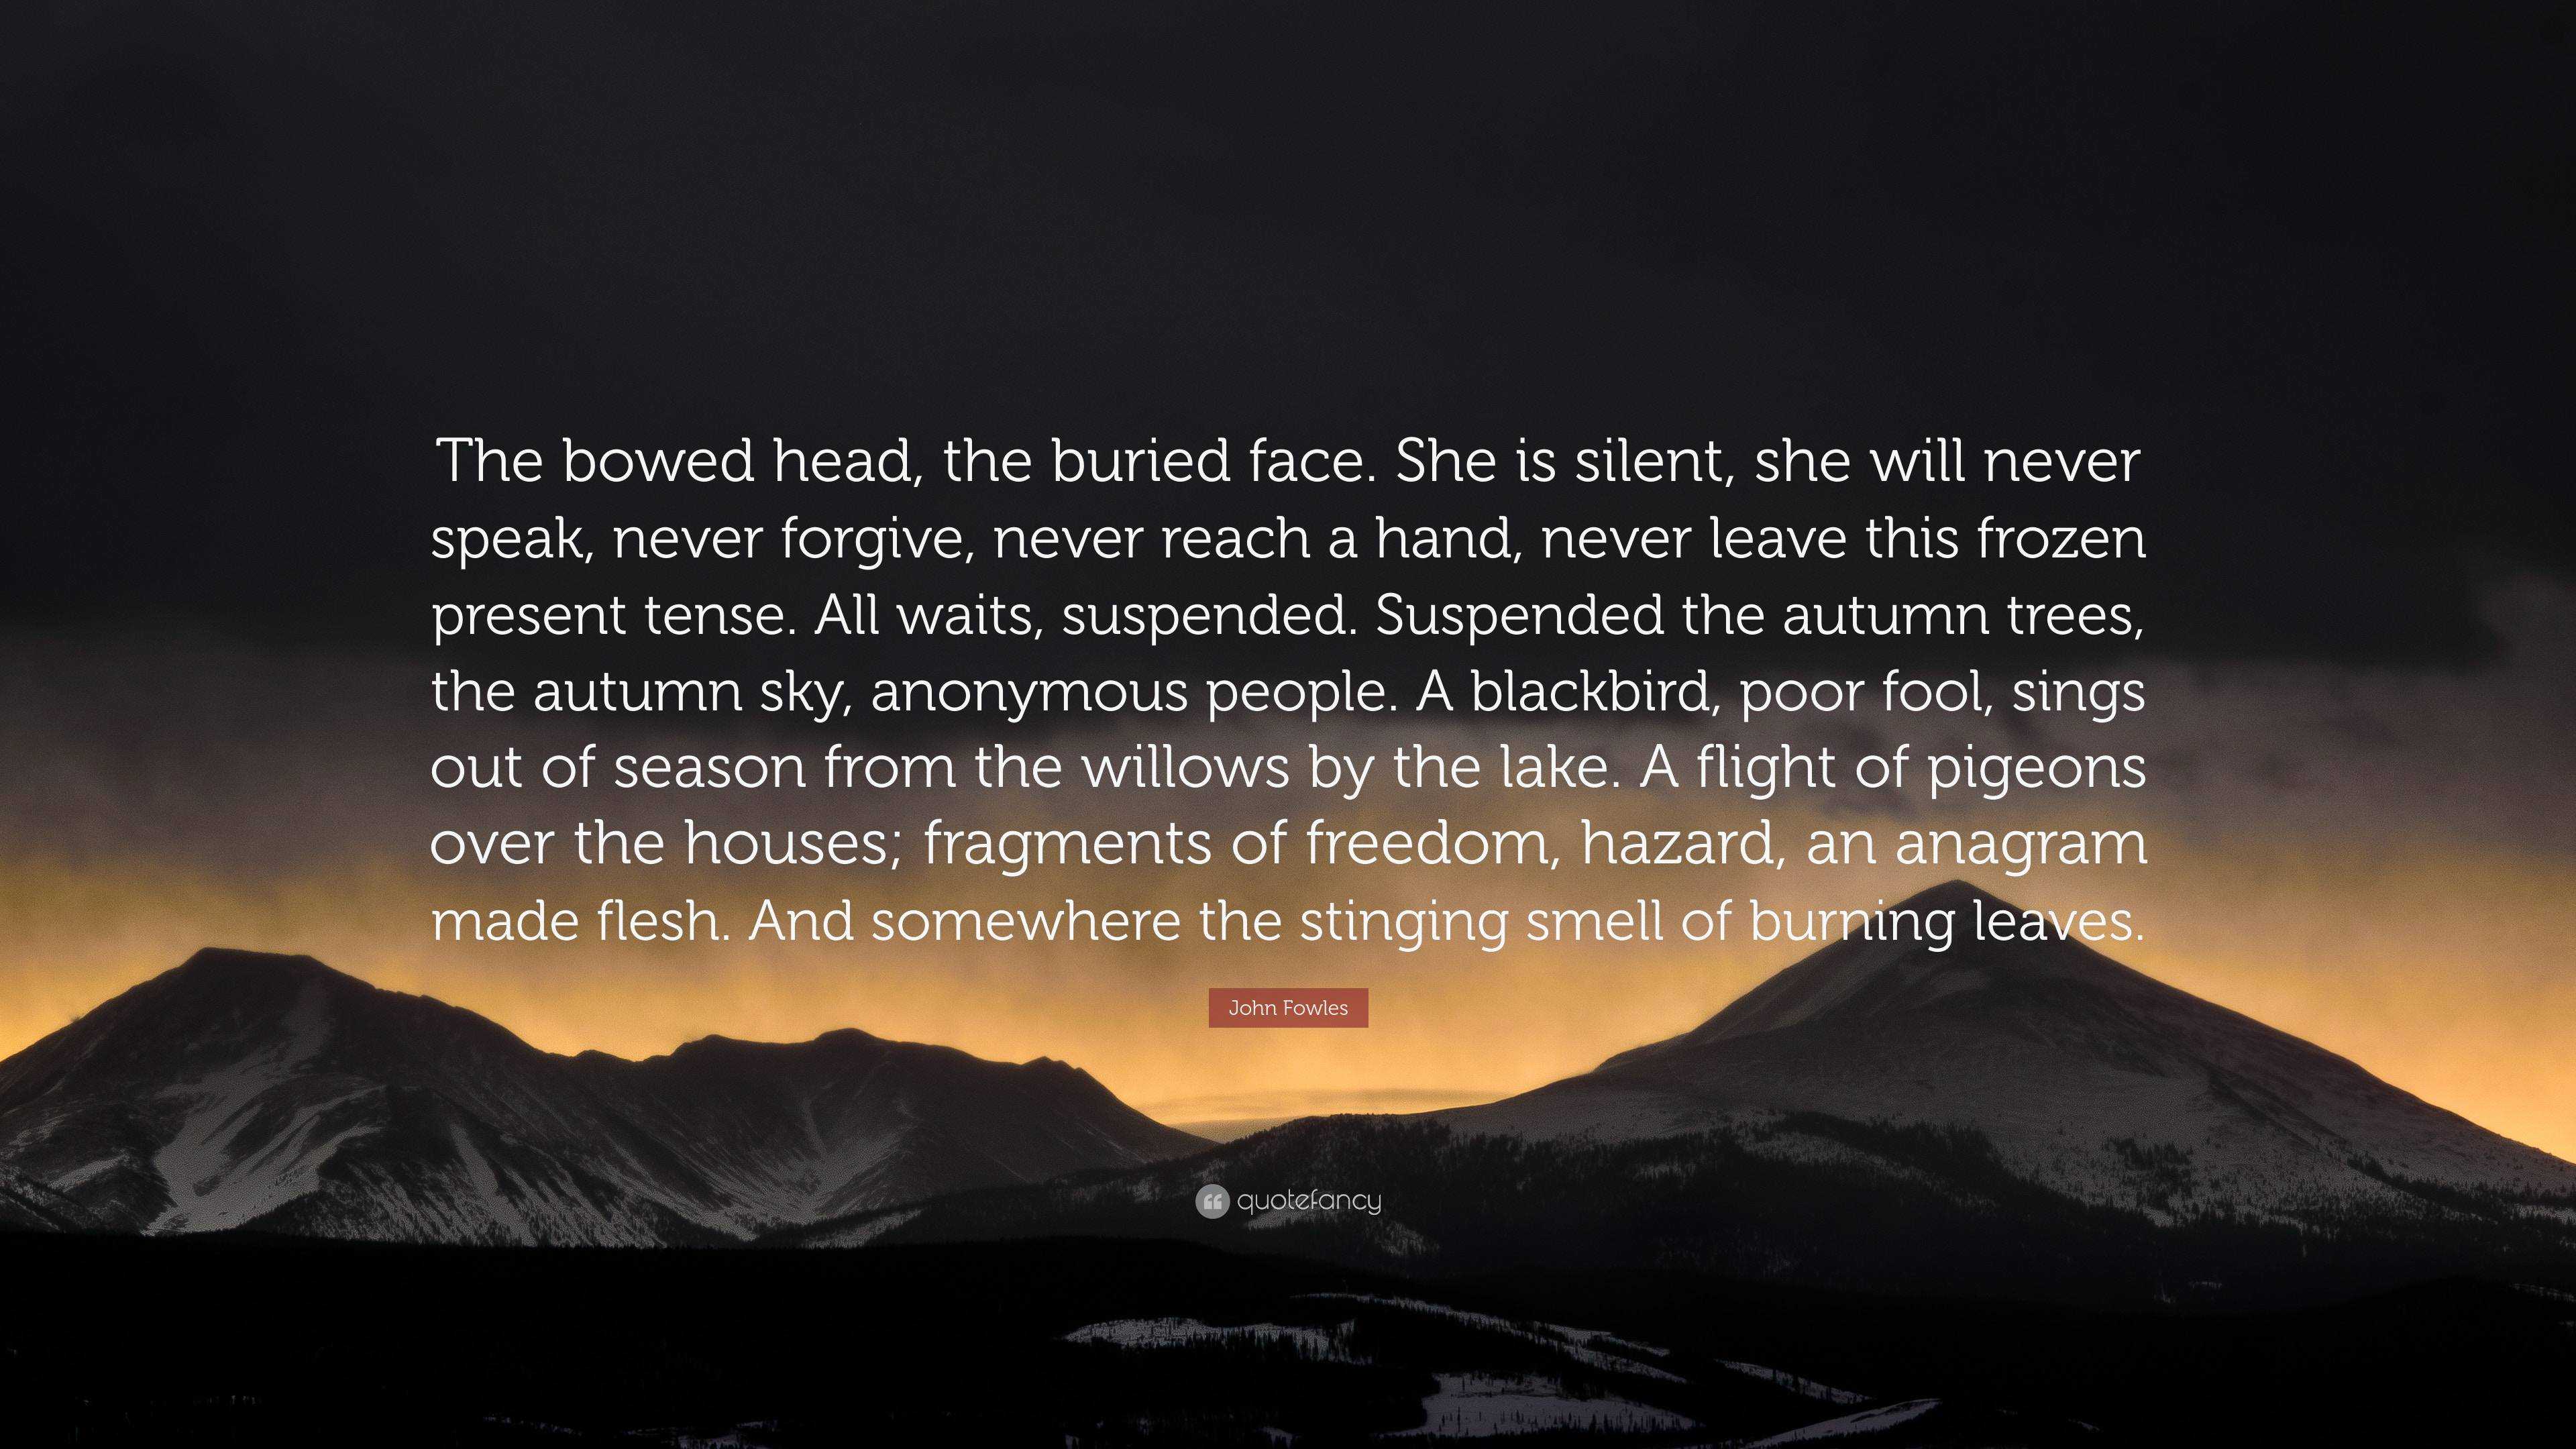 John Fowles Quote: “The bowed head, the buried face. She is silent ...